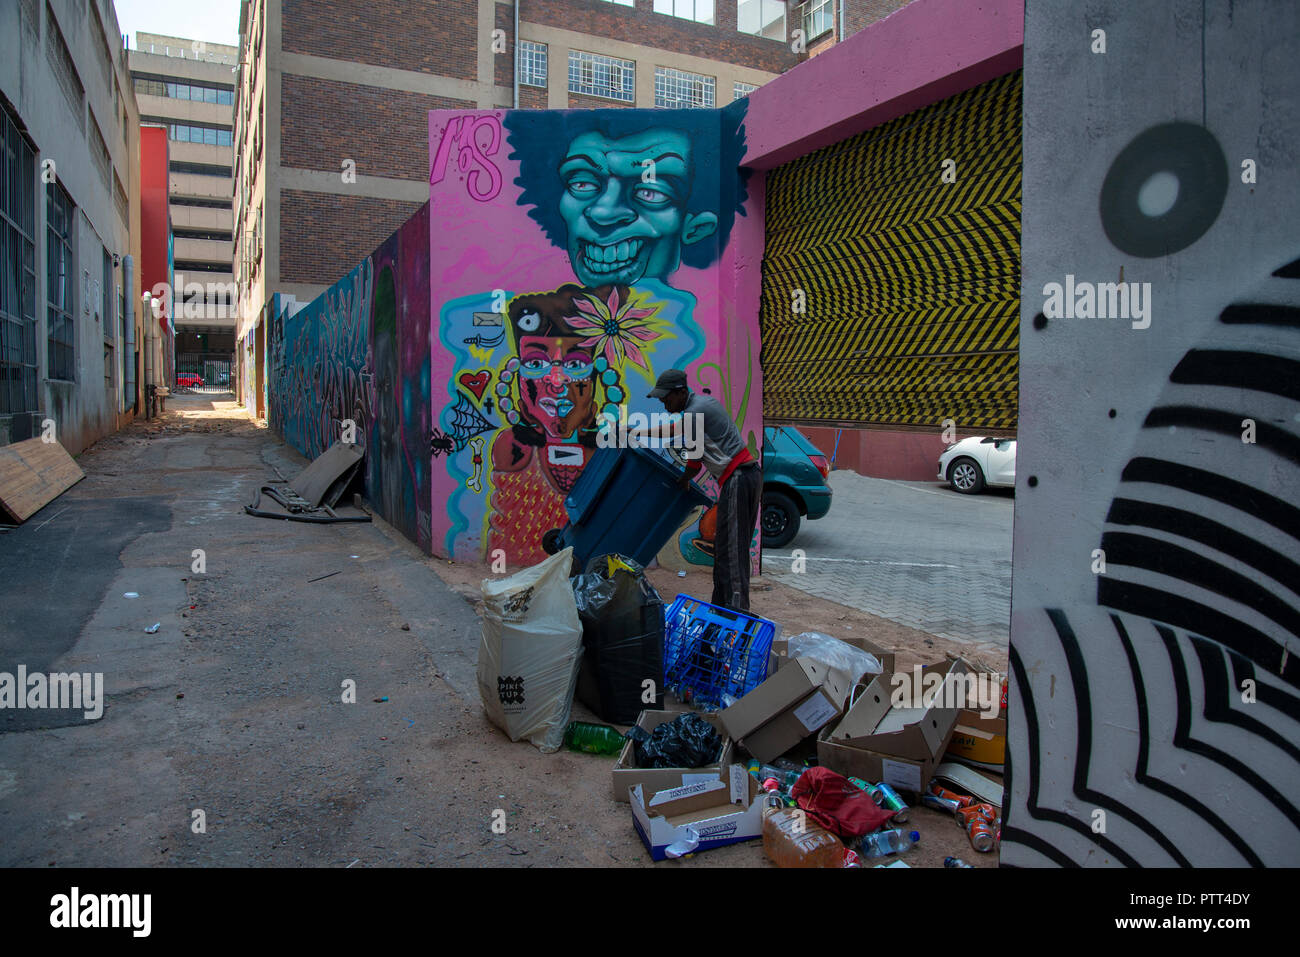 Johannesburg, South Africa, Wednesday, Oct. 10, 2018. A man takes out the trash as the annual "City Of Gold" Urban Art Festival kicked off its graffiti street tour in Johannesburg today.  Labelled vandalism by some, the festival highlights the positive aspects of this art form and seeks to increase the appreciation for it among the general public.   These mural projects often enhance and activate sites in the Johannesburg inner-city area that are either forgotten or feared by the city's inhabitants, organizers said. Credit: Eva-Lotta Jansson/Alamy Live News Stock Photo